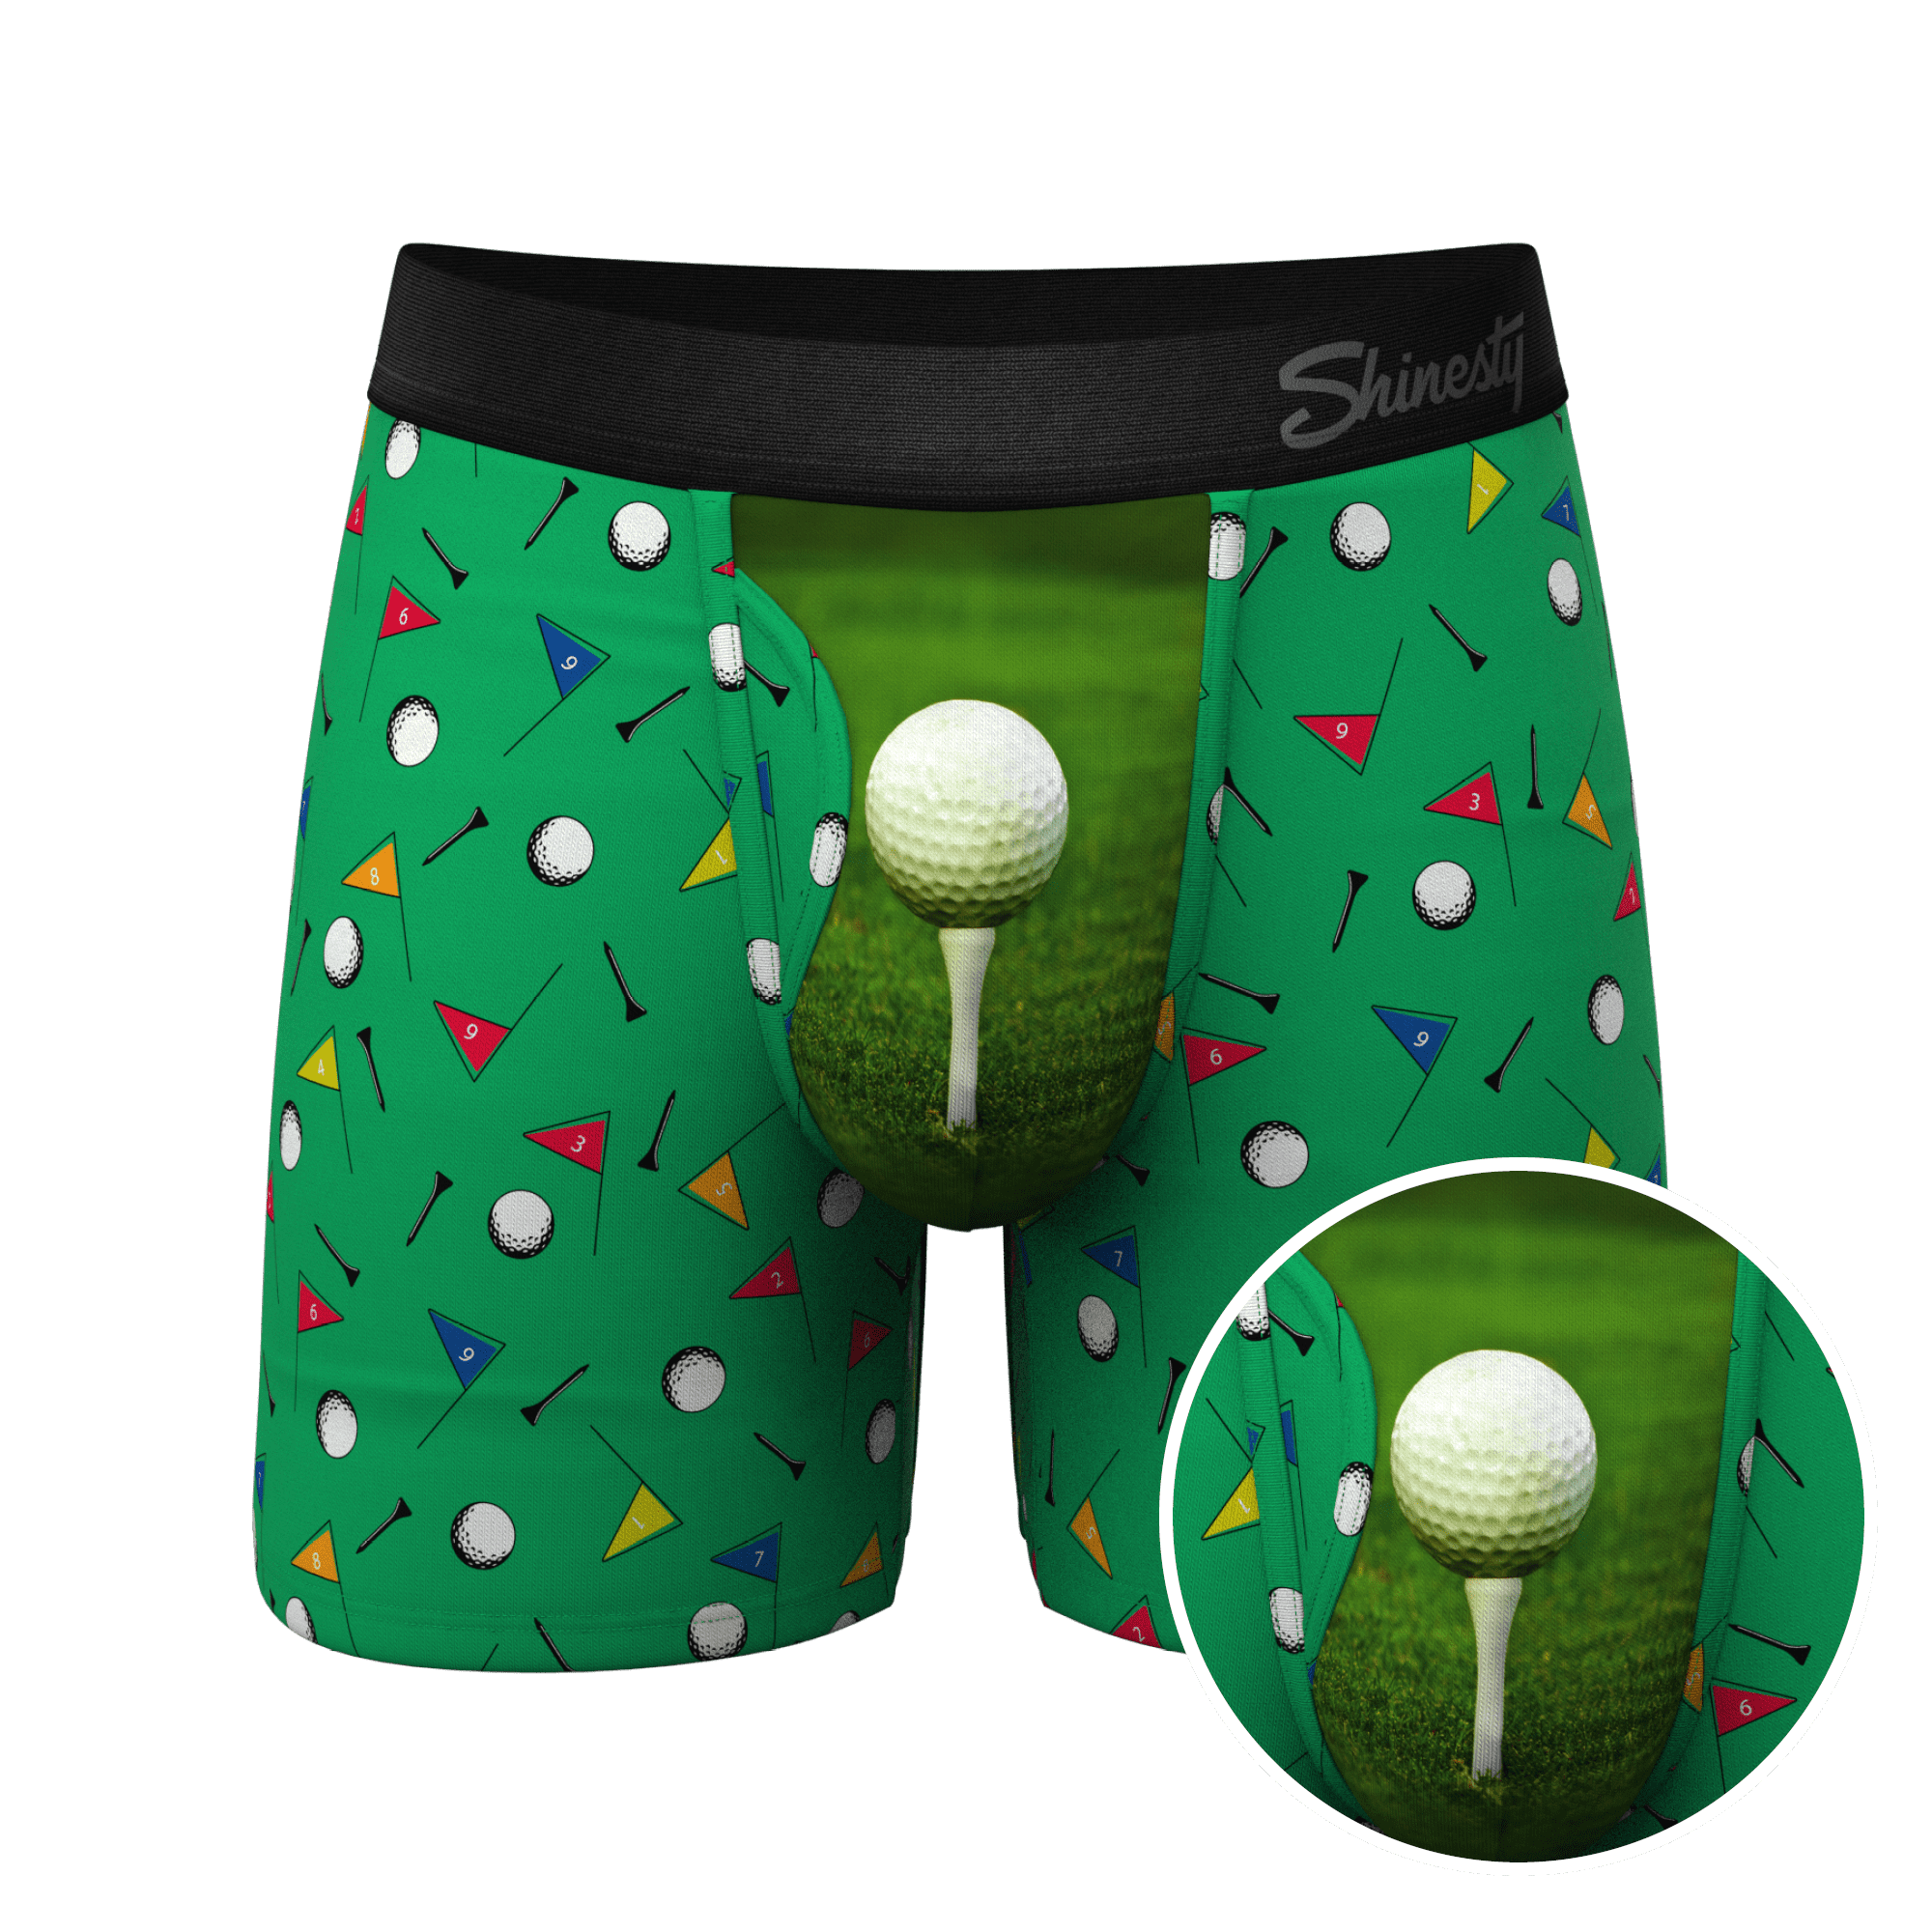 Our most supportive Undies ever. Welcome, The Ball Caddy ™ Pouch